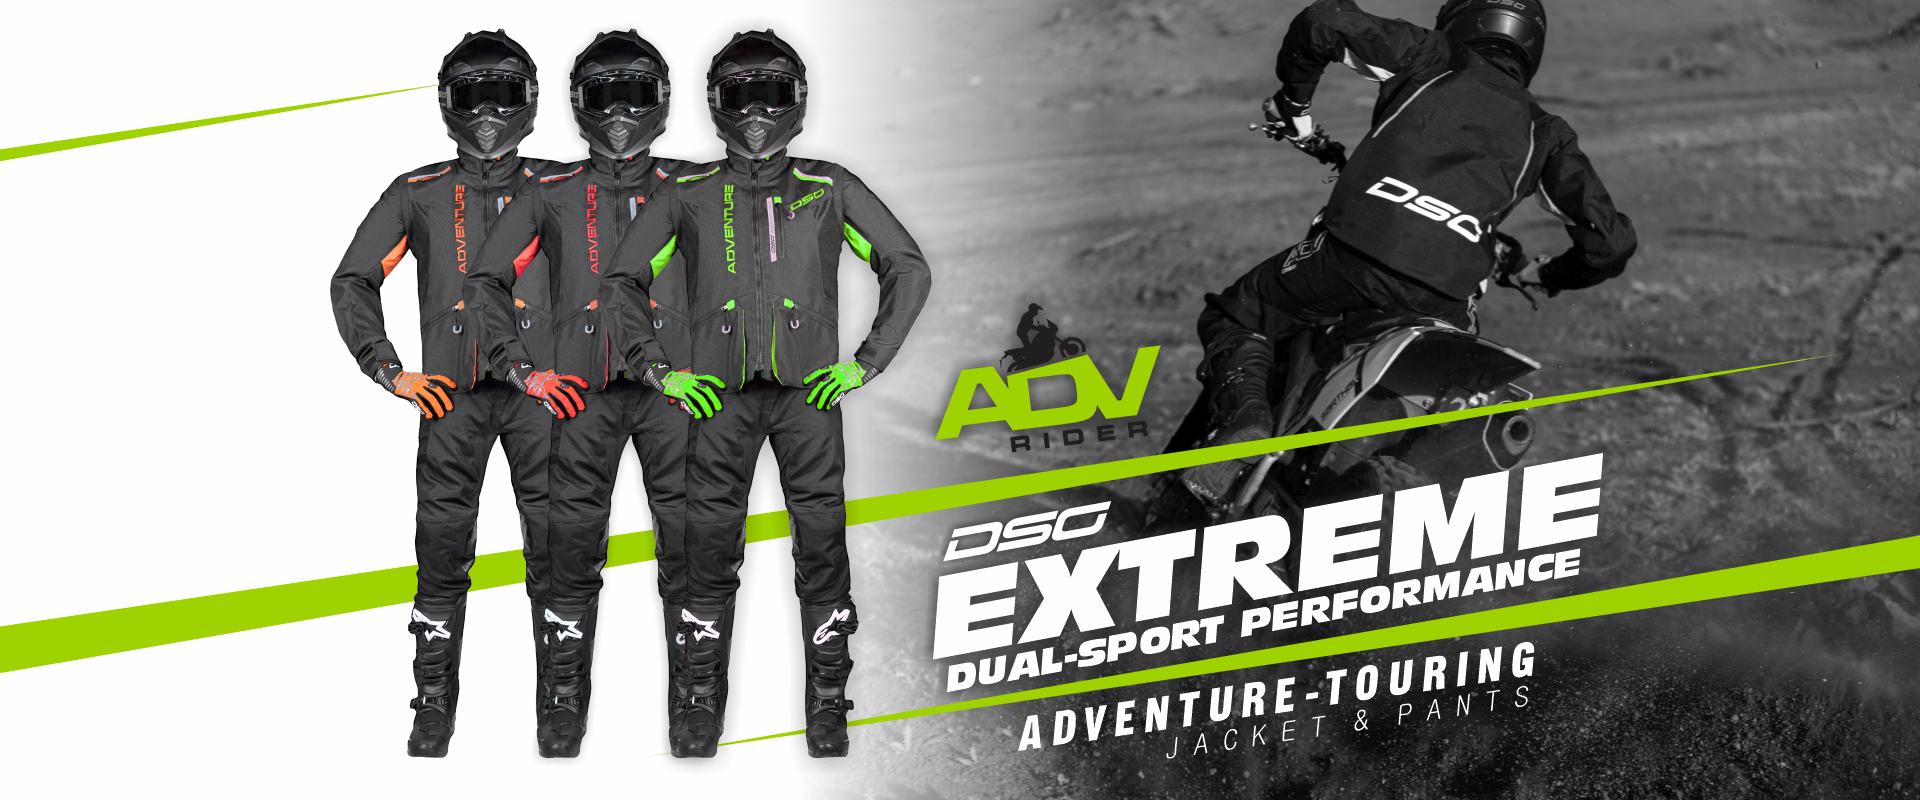 DSG Adventure-Touring Jackets and Pants